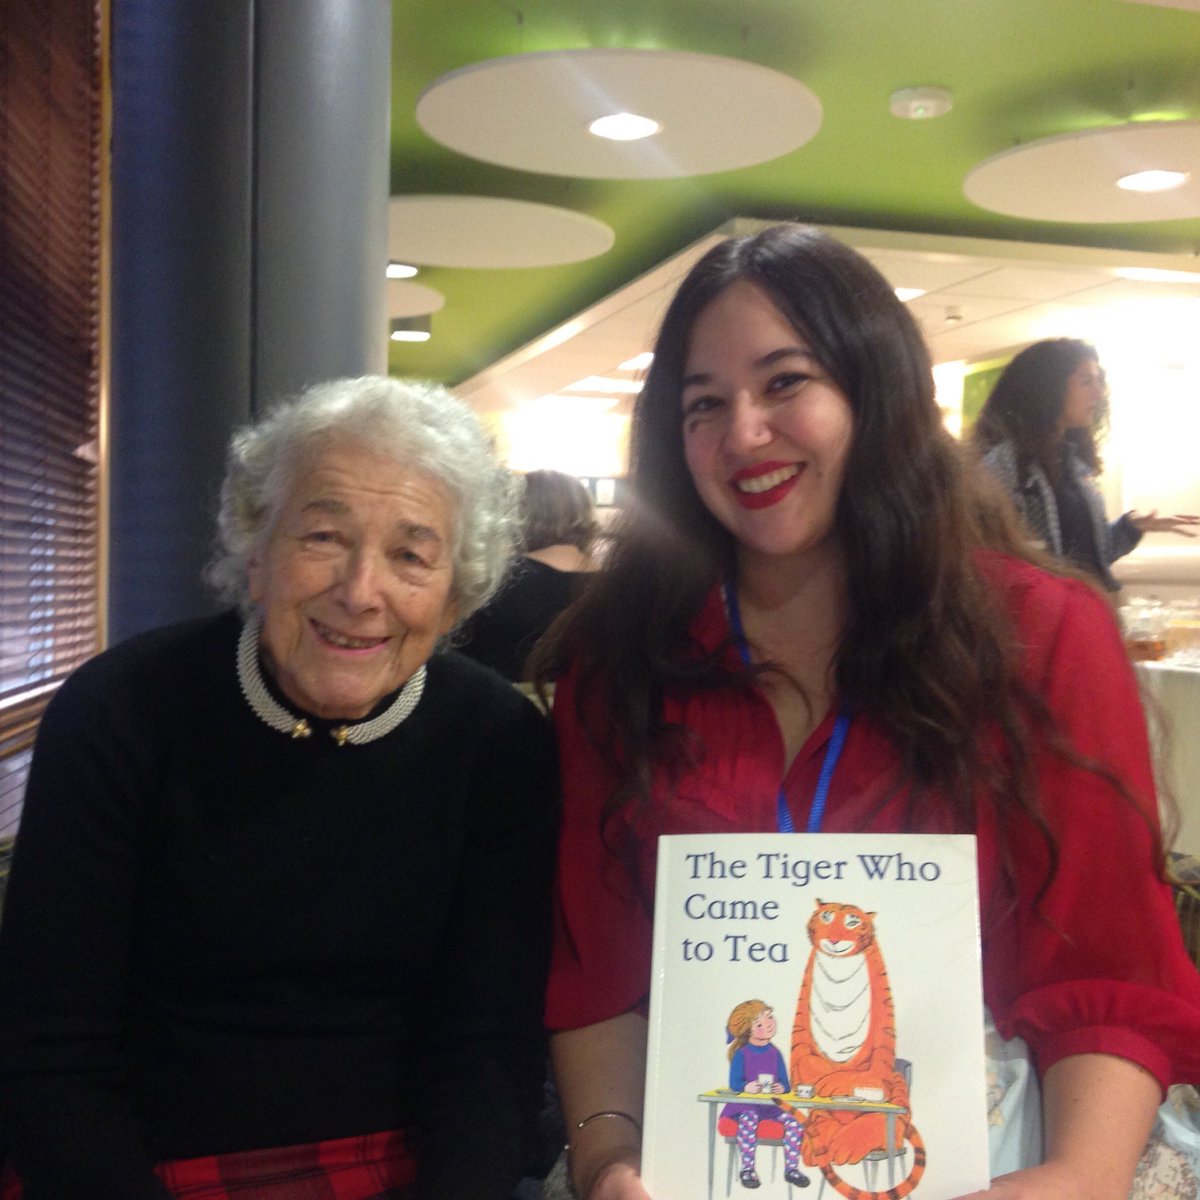 A massive, many happy returns of the day to Kiran Millwood Hargrave @Kiran_MH! Here she is looking gorgeous with our Barnes beauty, the late, great #JudithKerr in 2016